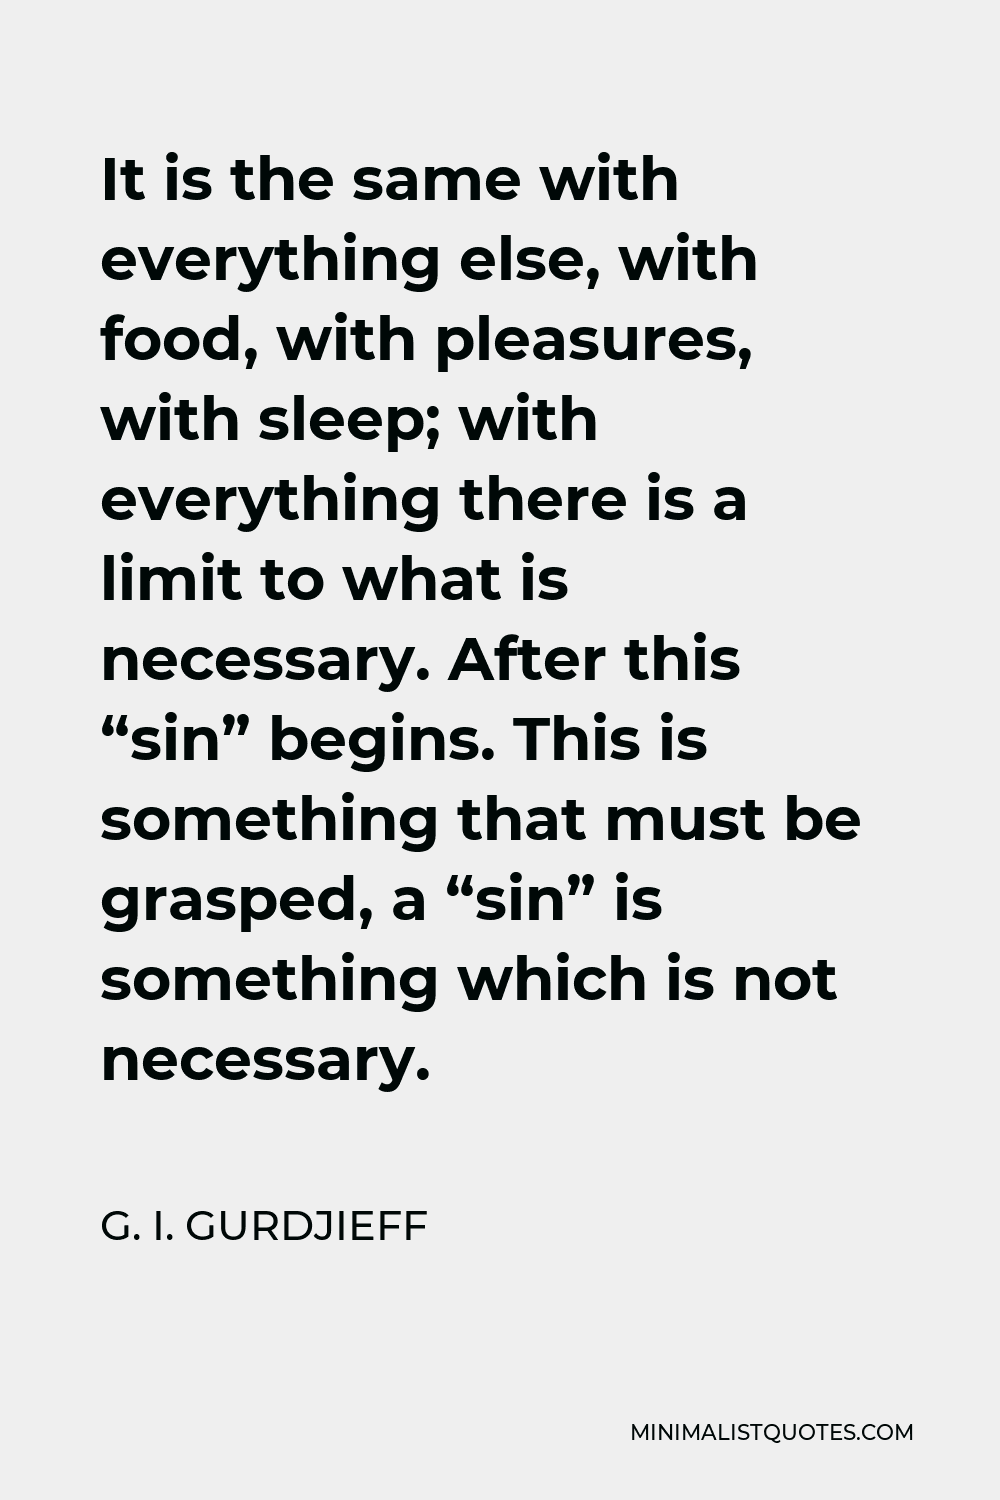 G. I. Gurdjieff Quote - It is the same with everything else, with food, with pleasures, with sleep; with everything there is a limit to what is necessary. After this “sin” begins. This is something that must be grasped, a “sin” is something which is not necessary.